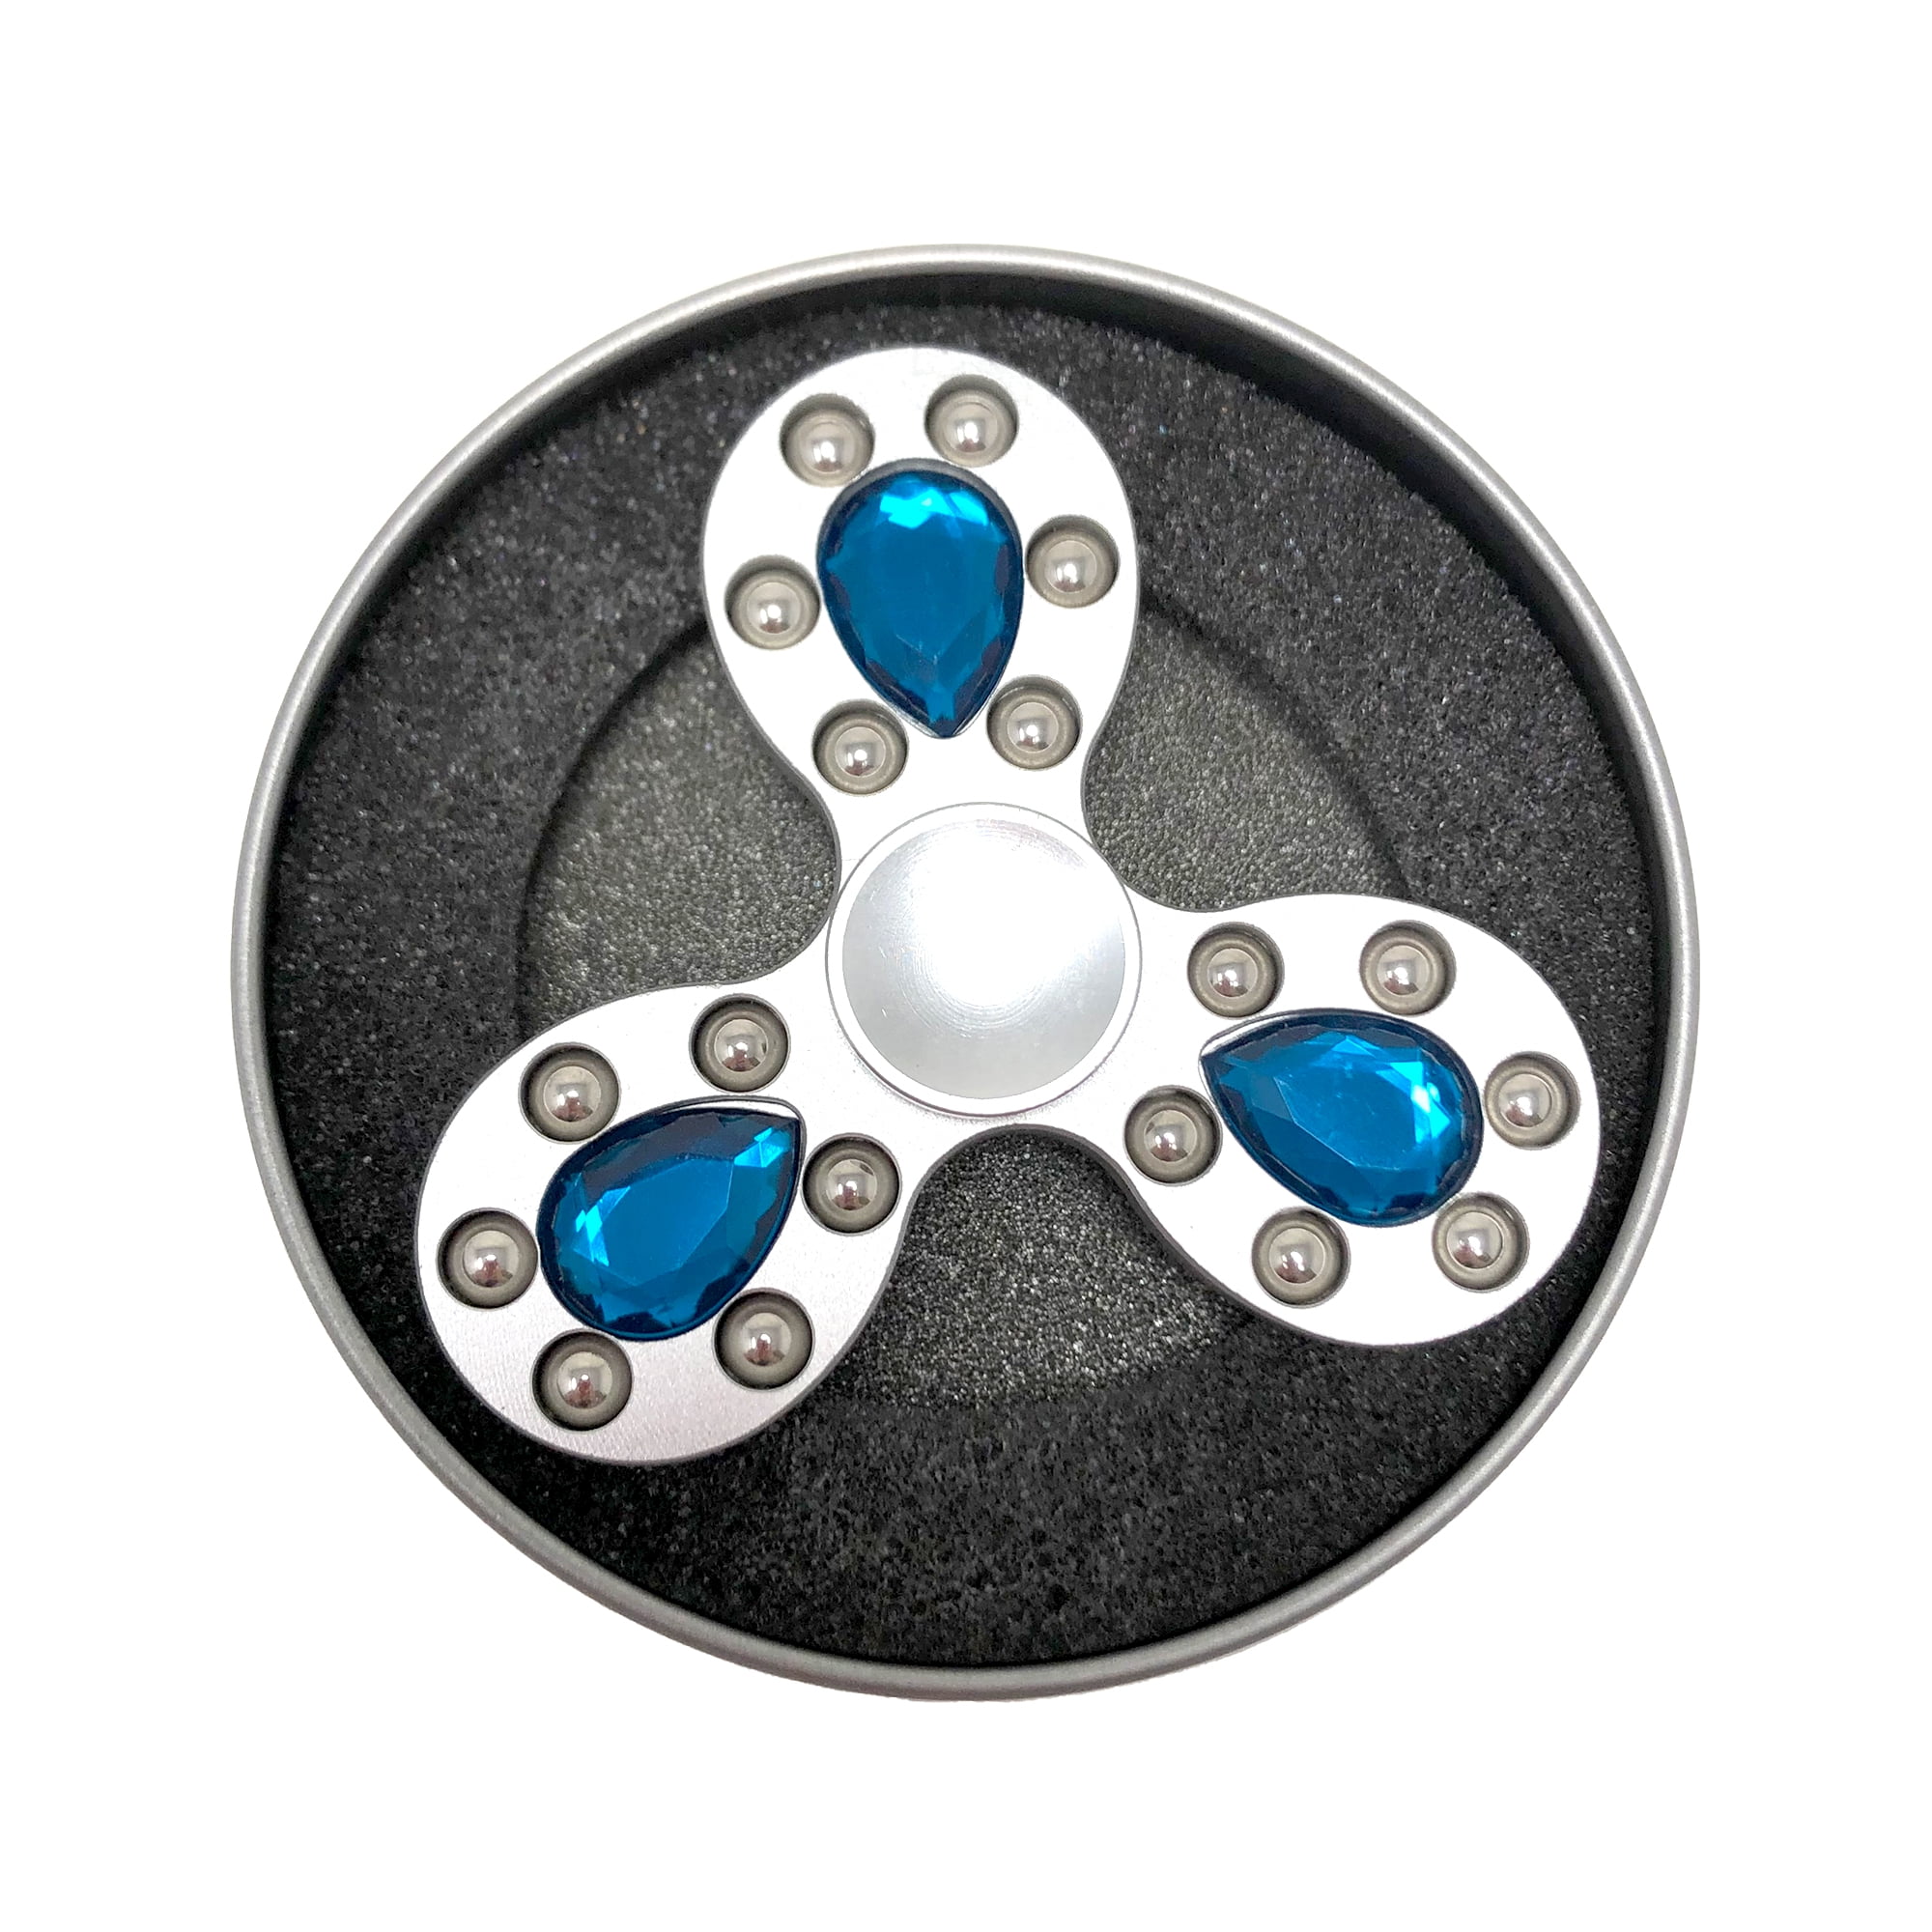 liner undulate Skråstreg Zekpro Fidget Spinners, 360 Spinner big rhinestone aqua blue,Spinner Office  Desk Classroom ADHD Anti Anxiety Focus Finger Fidget Spinners Stress Relief  Toys Gifts for Adults Kids Party Favors - Walmart.com